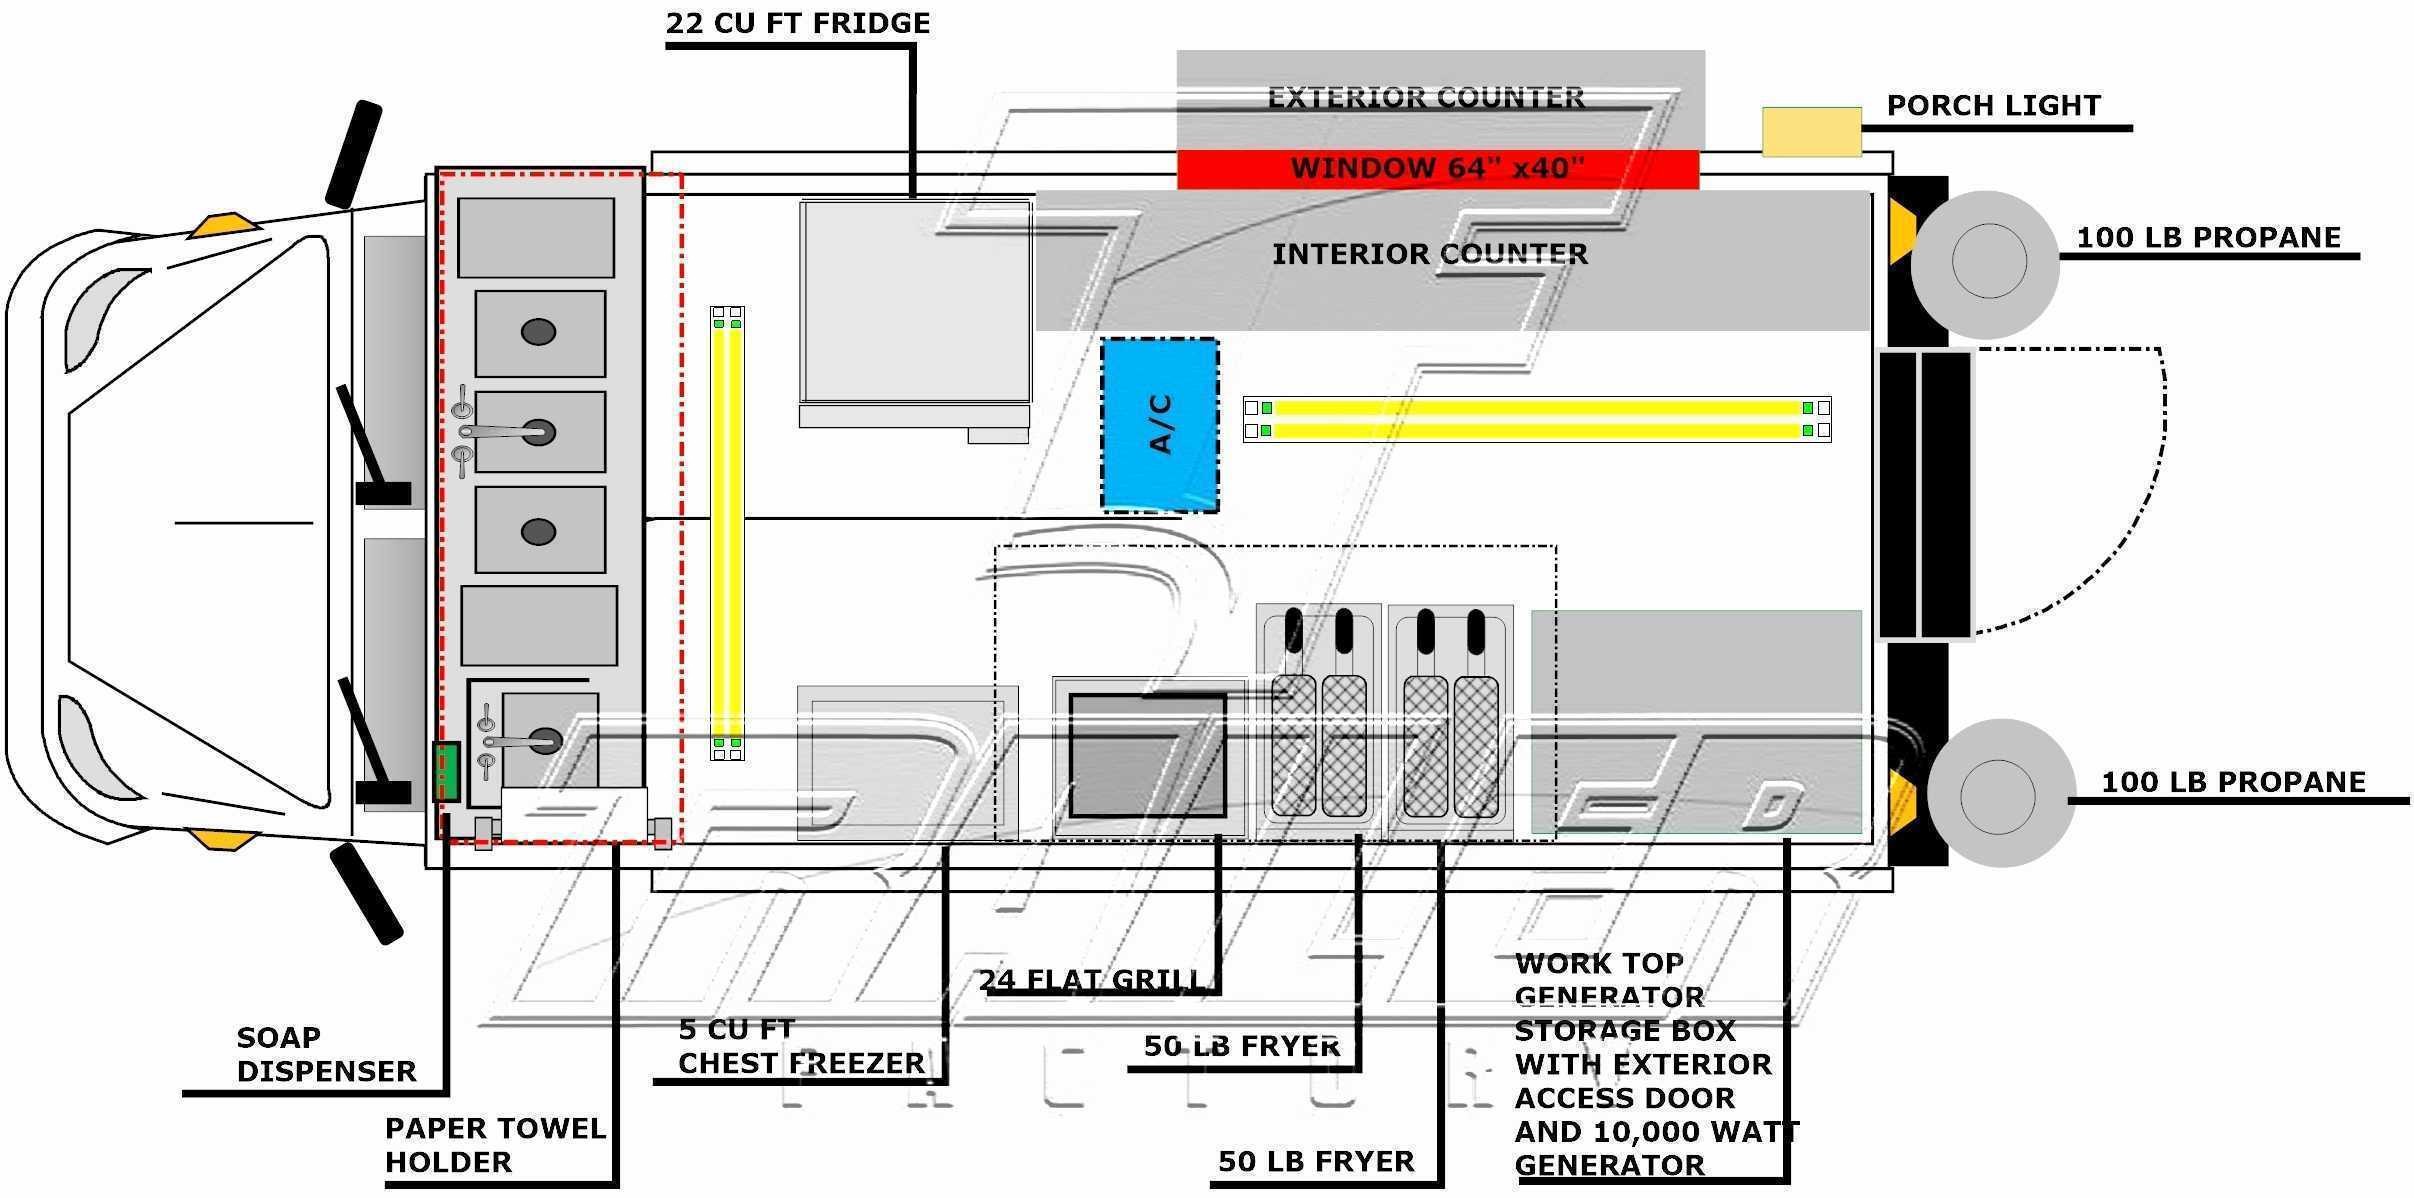 Food Truck Water System Diagram 43 Inspirational Image Food Truck Floor Plans House Floor Plans Of Food Truck Water System Diagram